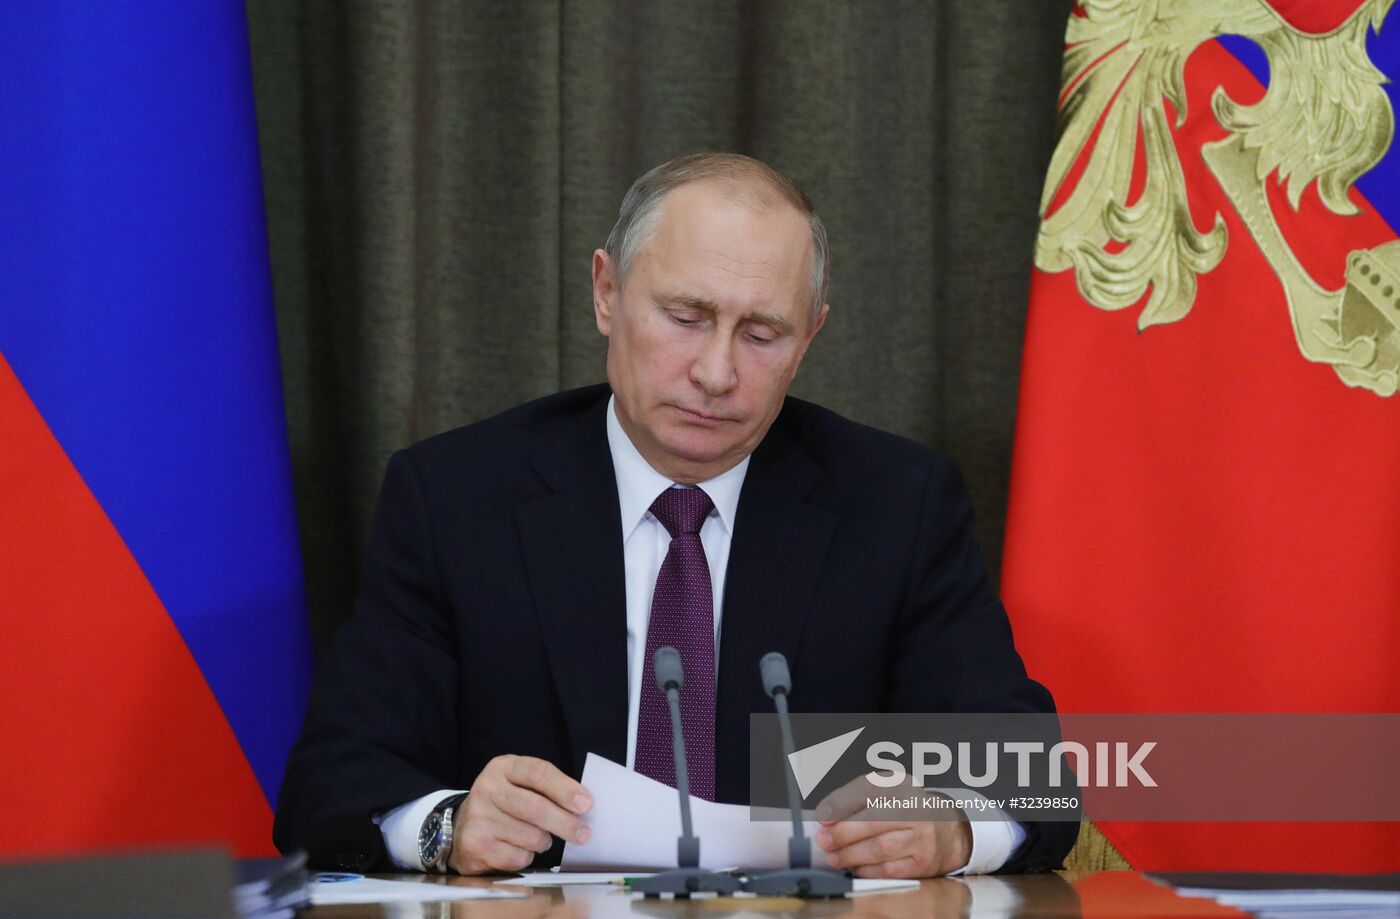 President Vladimir Putin holds meeting with heads of Defense Ministry and defense industry